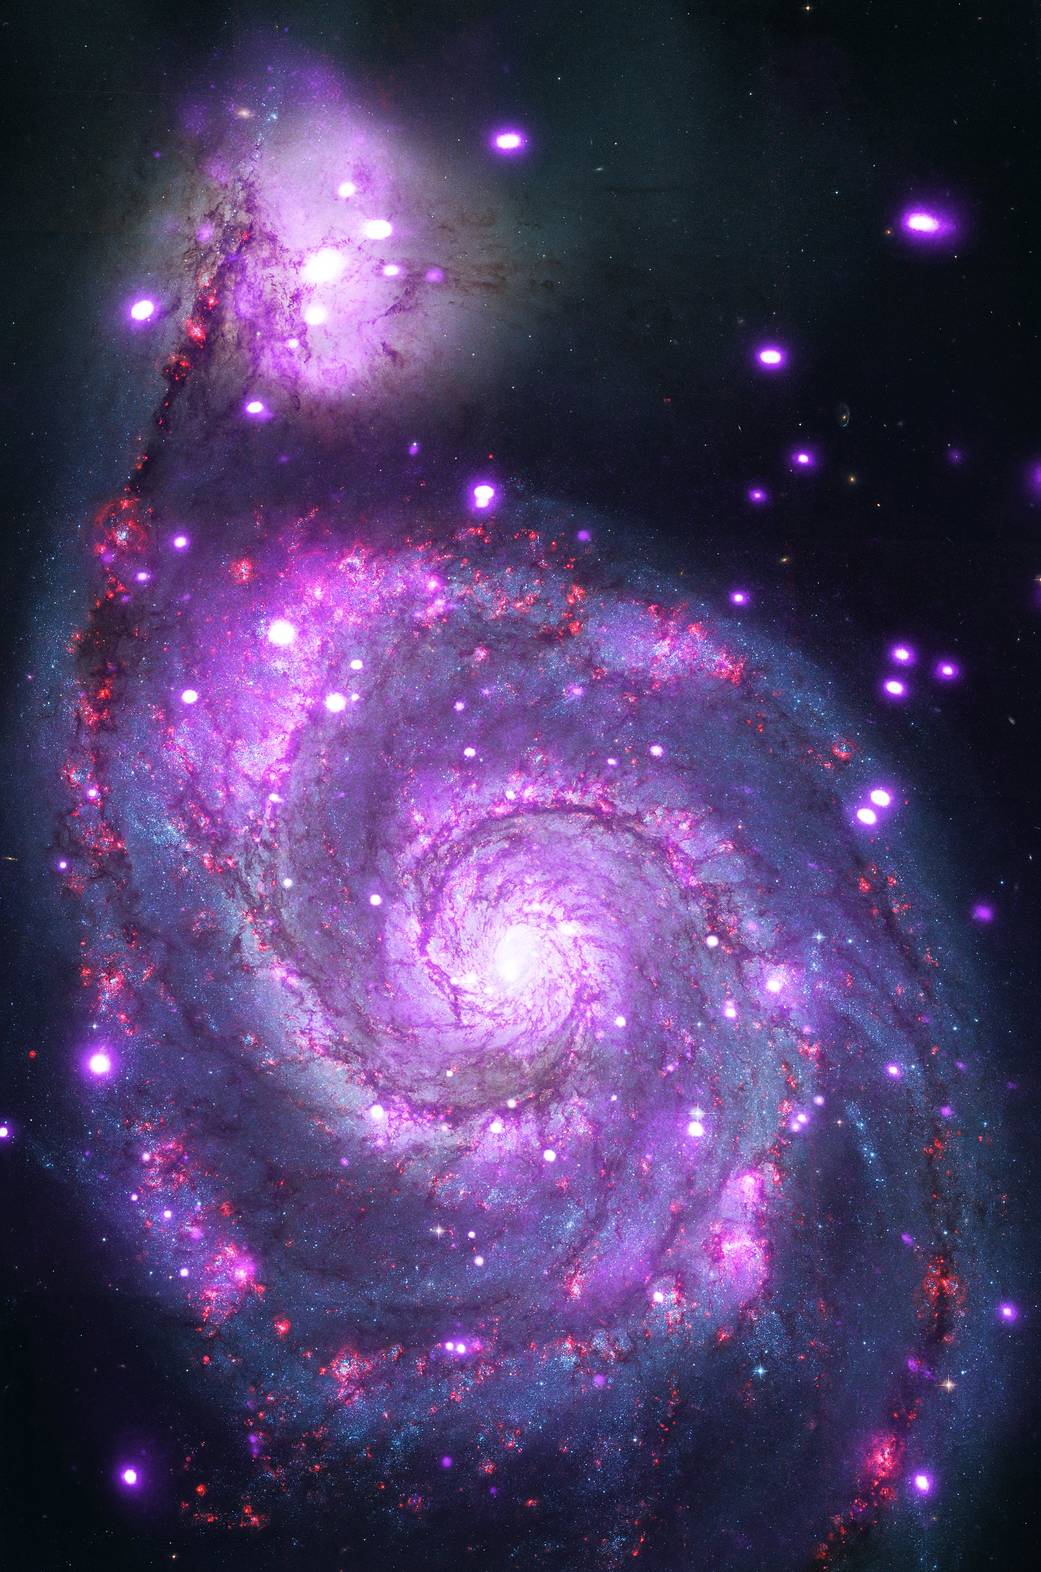 The Whirlpool Galaxy is a spiral galaxy with spectacular arms of stars and dust.